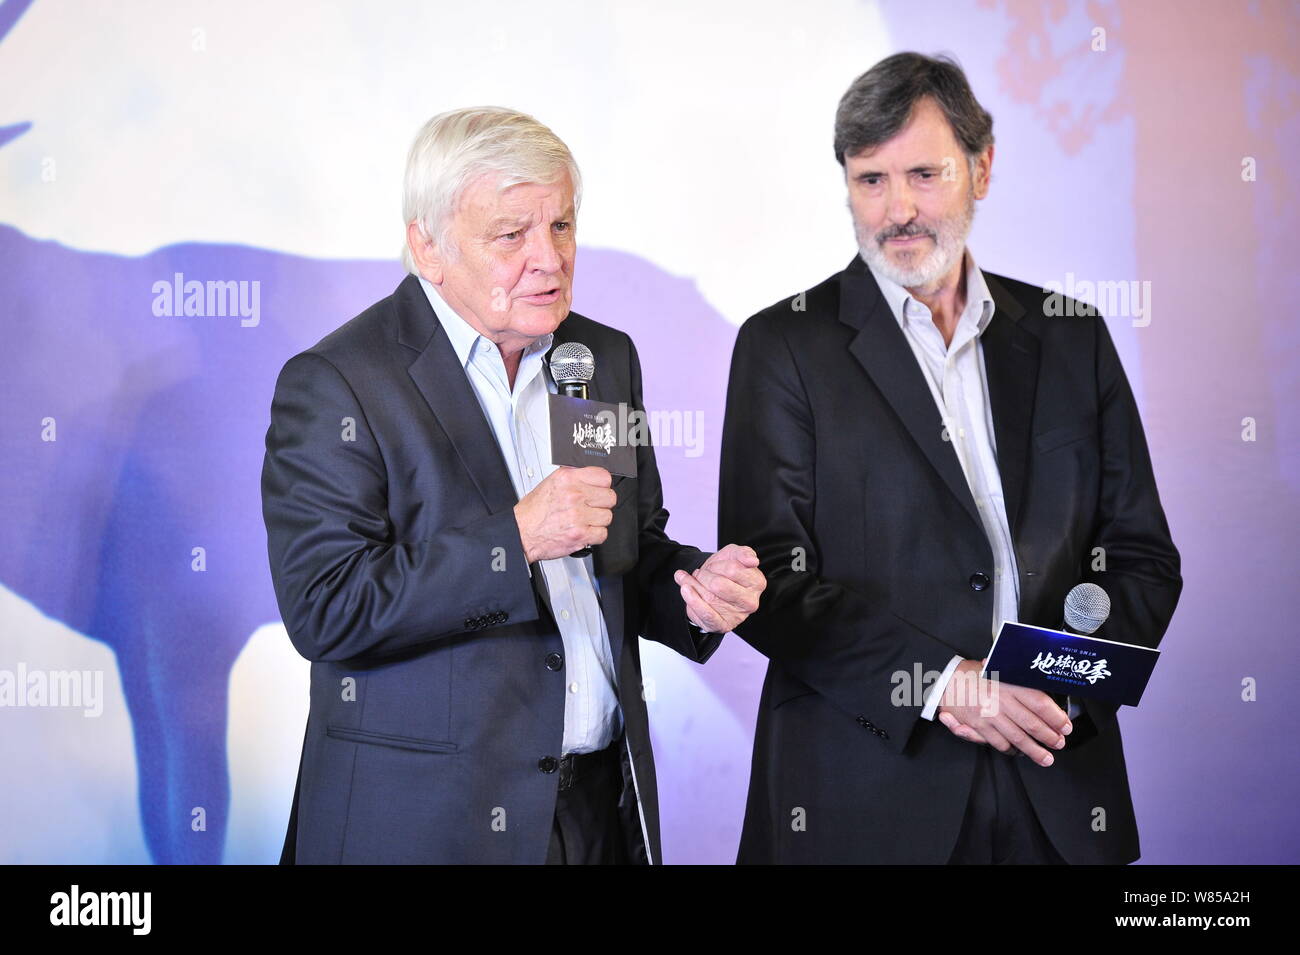 French directors Jacques Perrin, left, and Jacques Cluzaud attend a premiere conference of the documentary movie 'The Seasons' in Beijing, China, 25 S Stock Photo